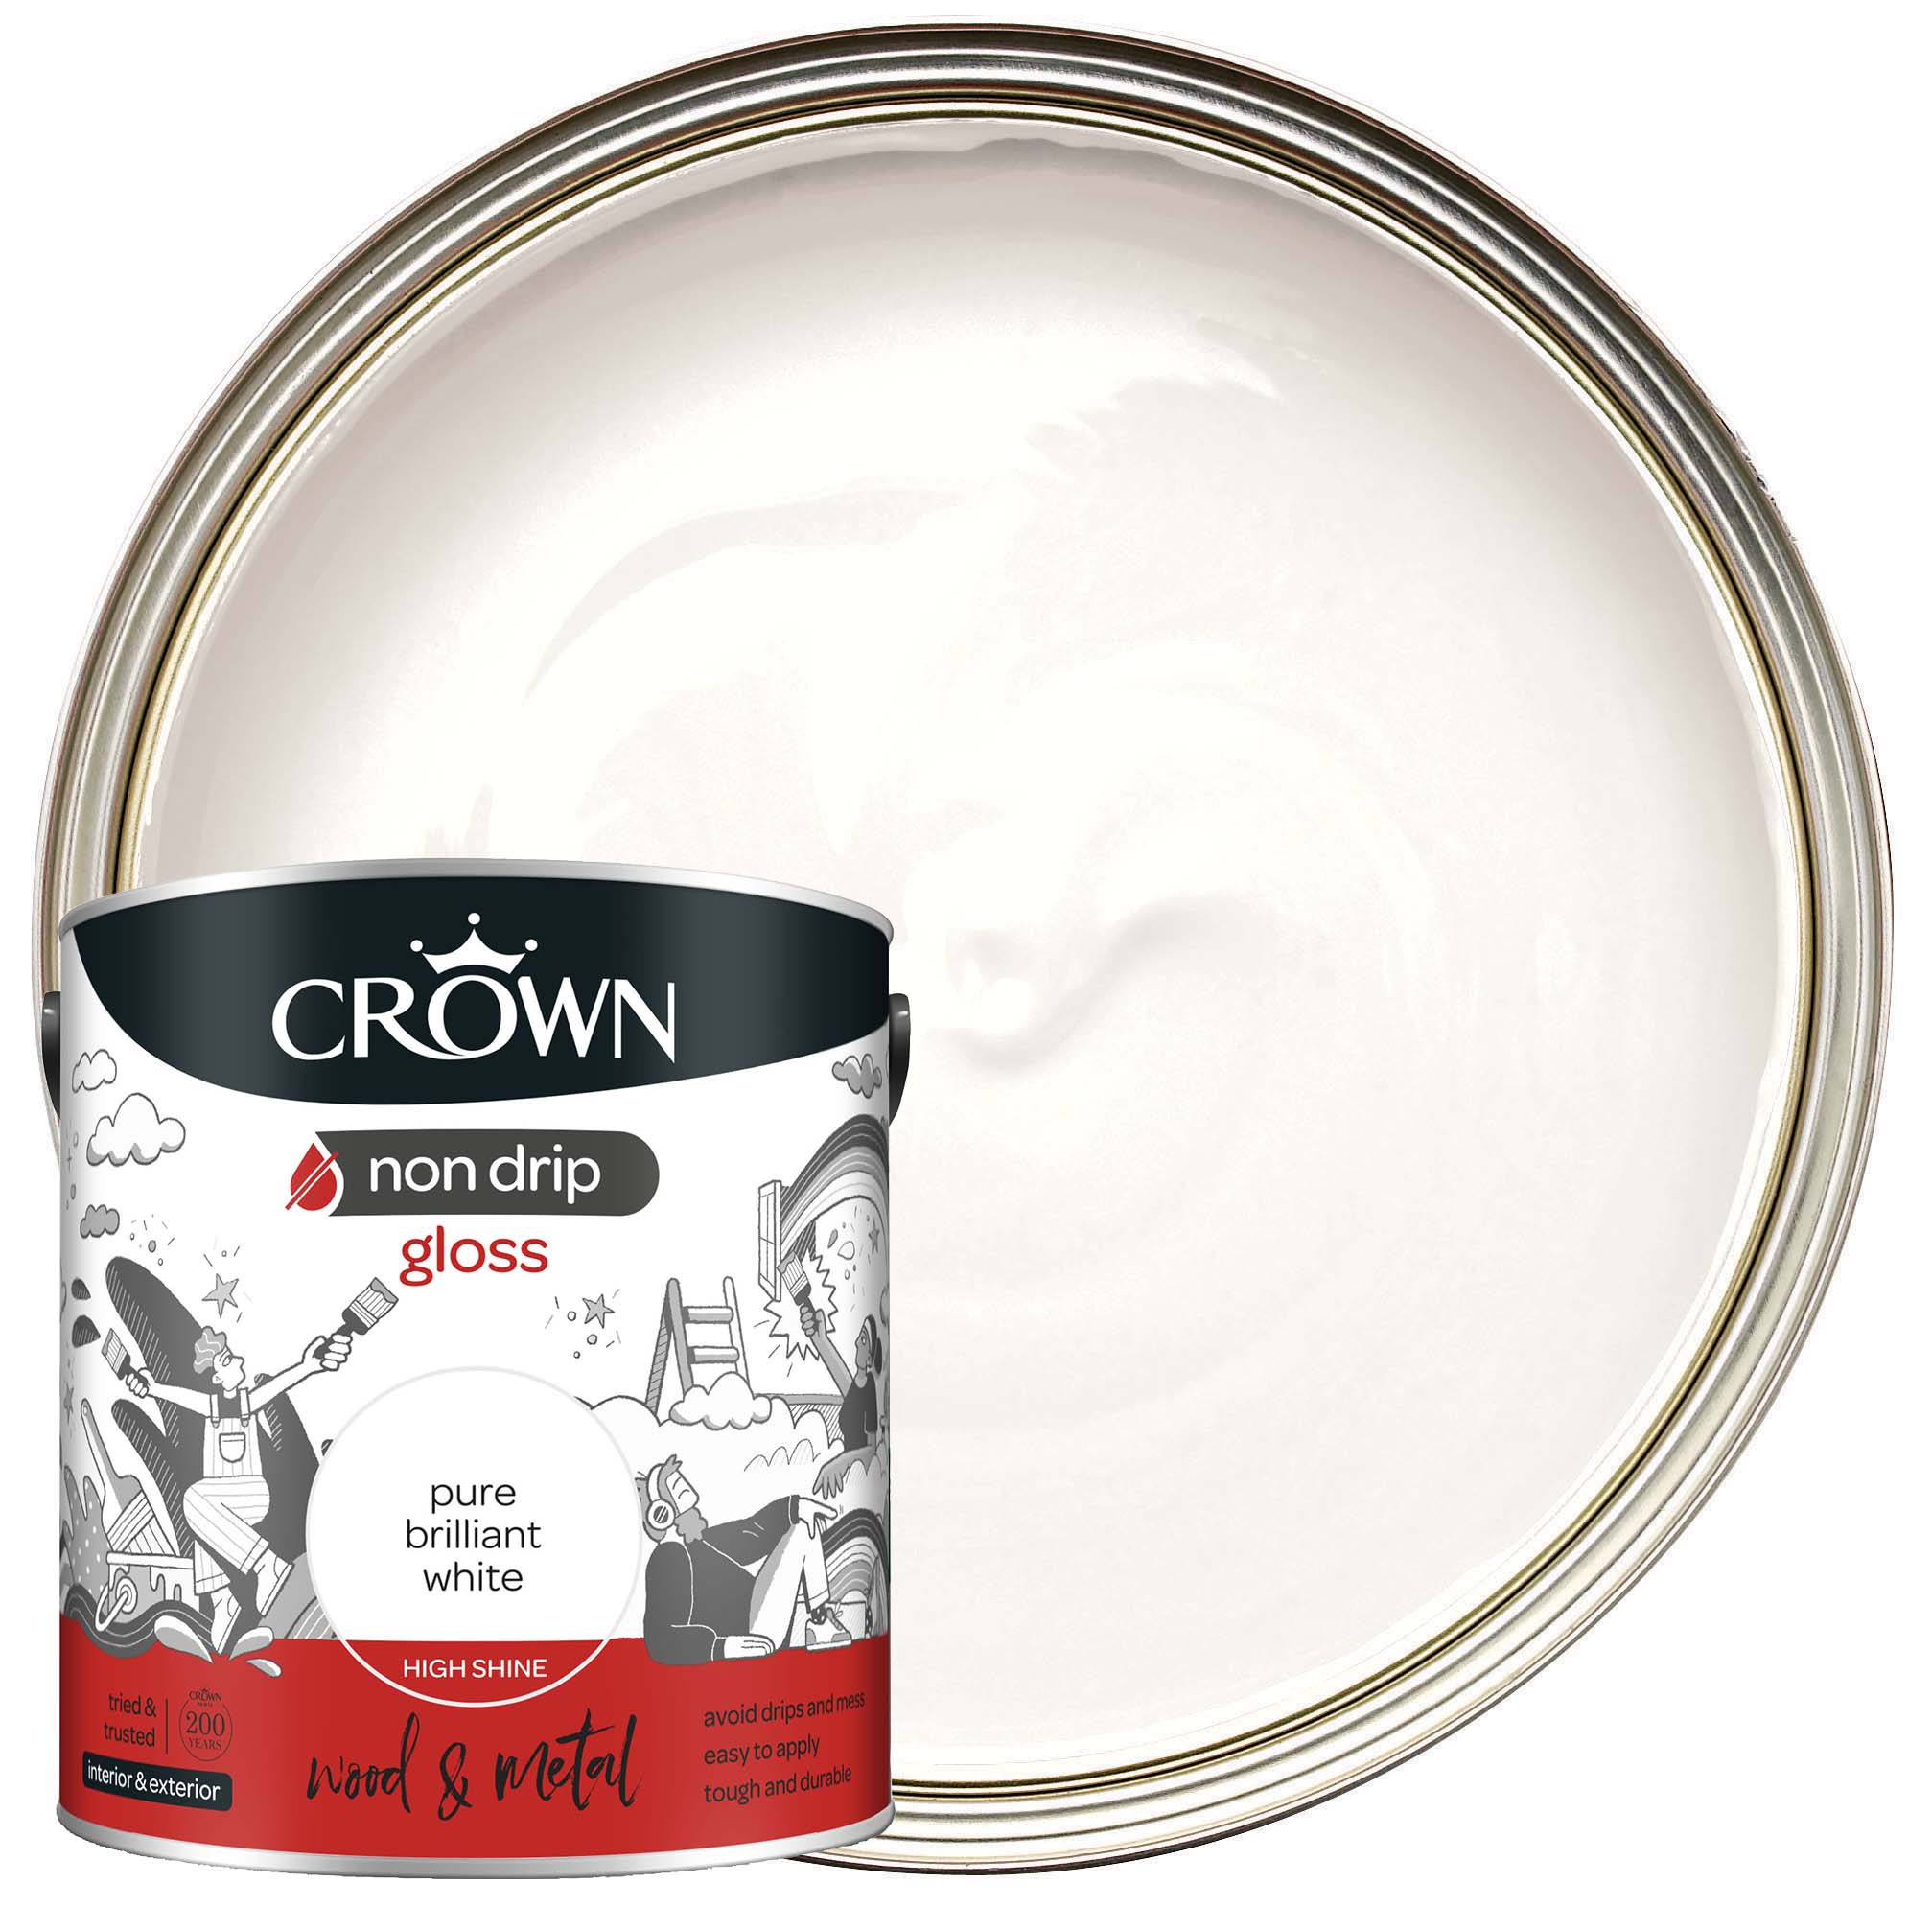 Image of Crown Non Drip Gloss Paint - Brilliant White - 2.5L